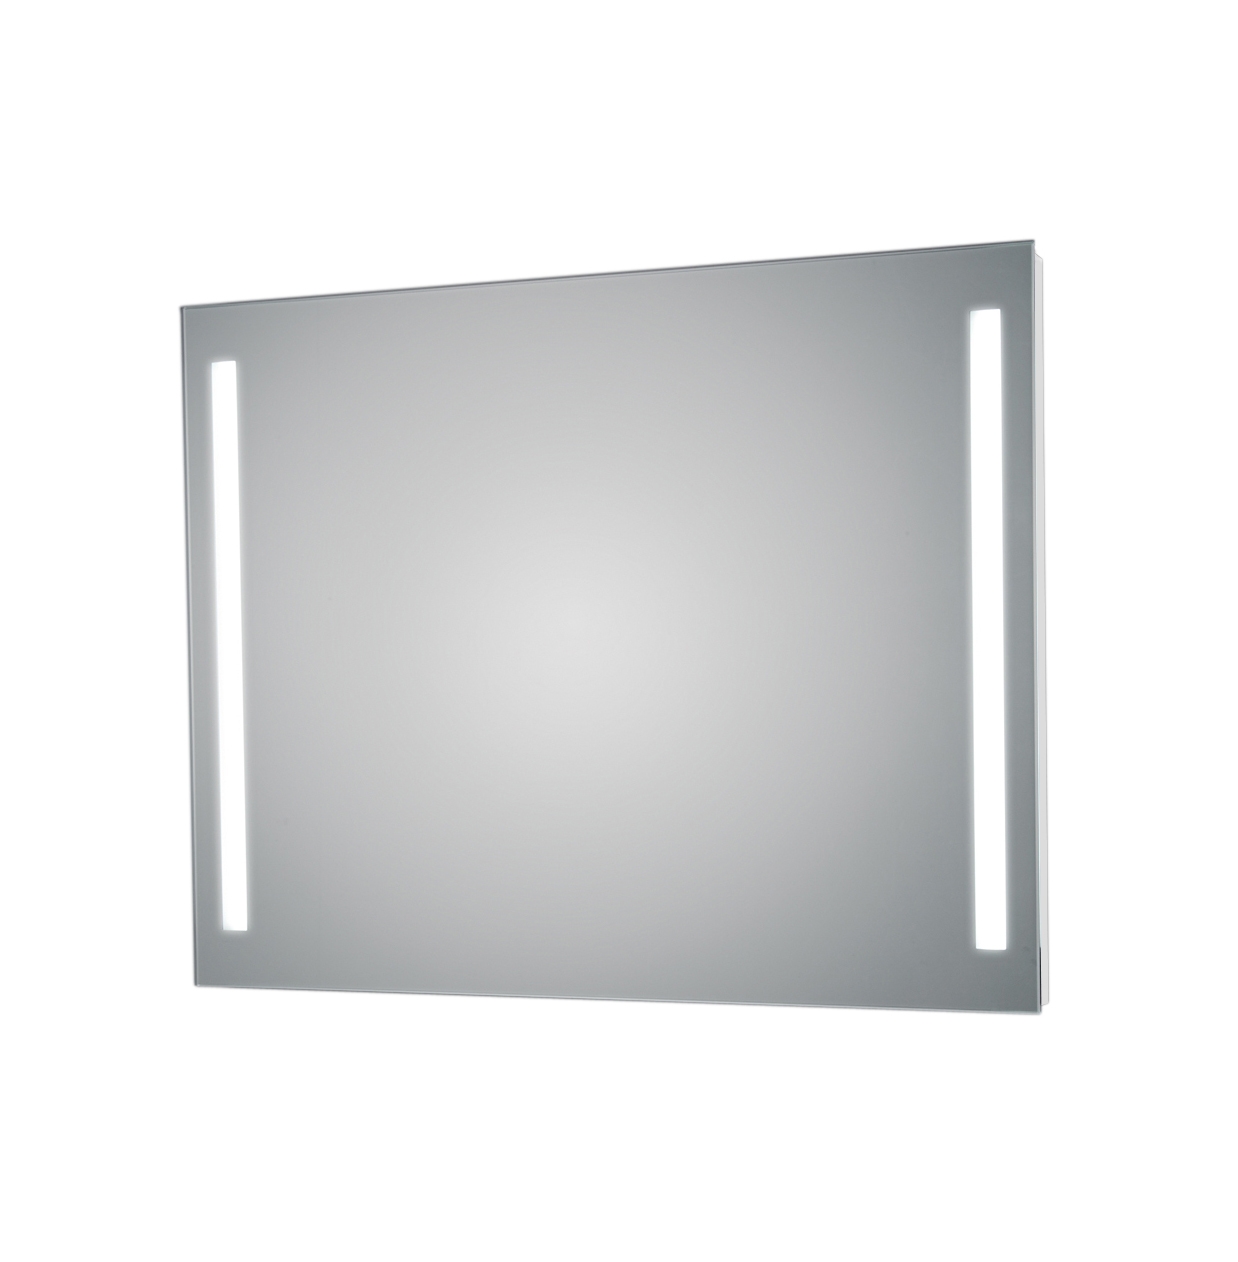 T5-2 mirror with LED light 39.3 x 27.5